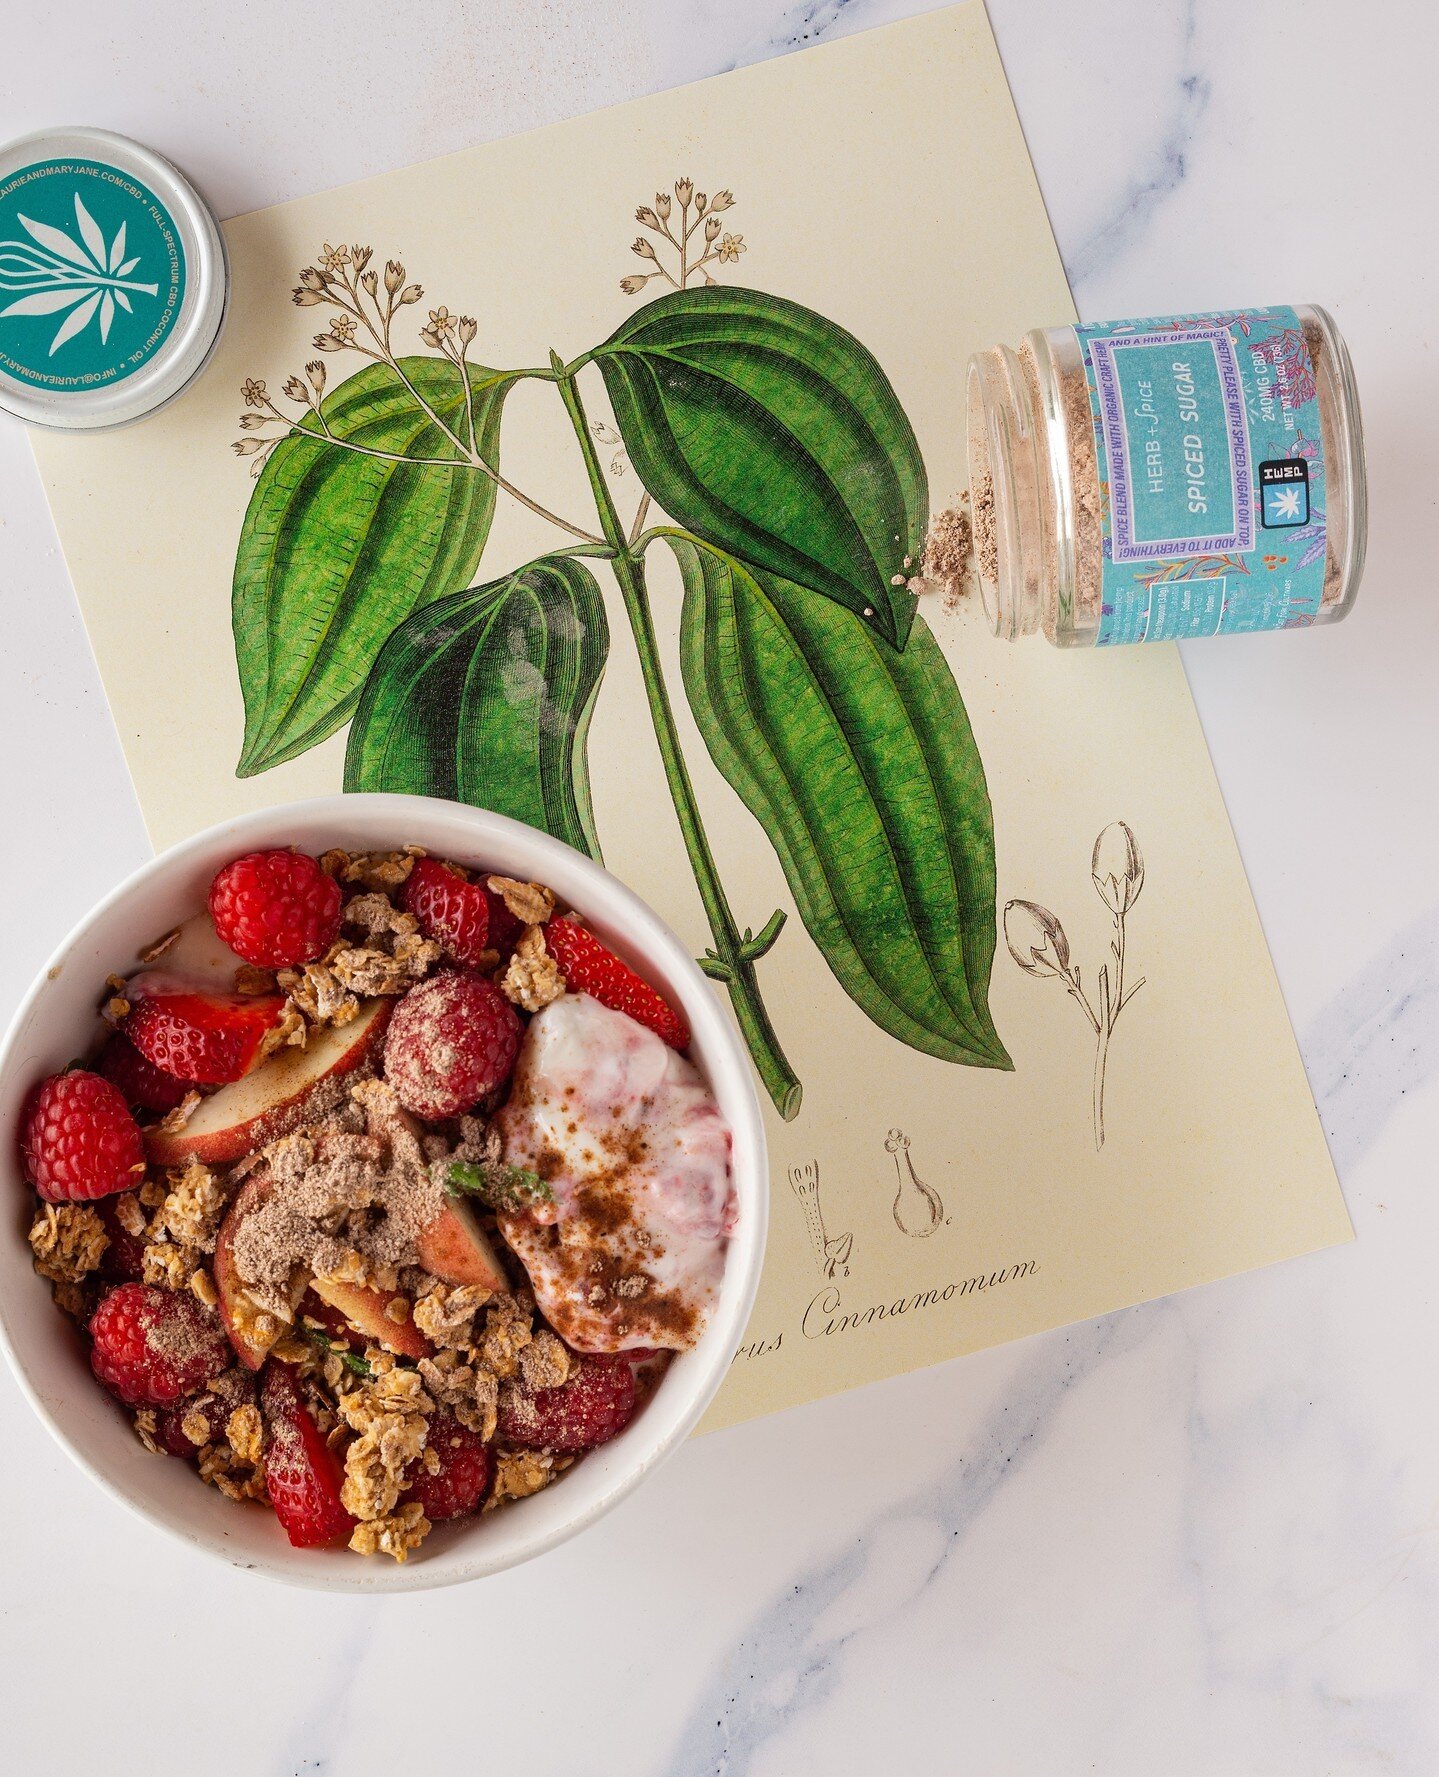 Ease into the morning with a little Herb + Spice. Our Spiced Sugar Seasoning takes your standard breakfast yogurt bowl to a whole new level of deliciousness. 🌞🥣✨ #LaurieAndMaryJane #herbandspice #CBD #InfuseEverything #breakfast⁠
.⁠
Check our bio f